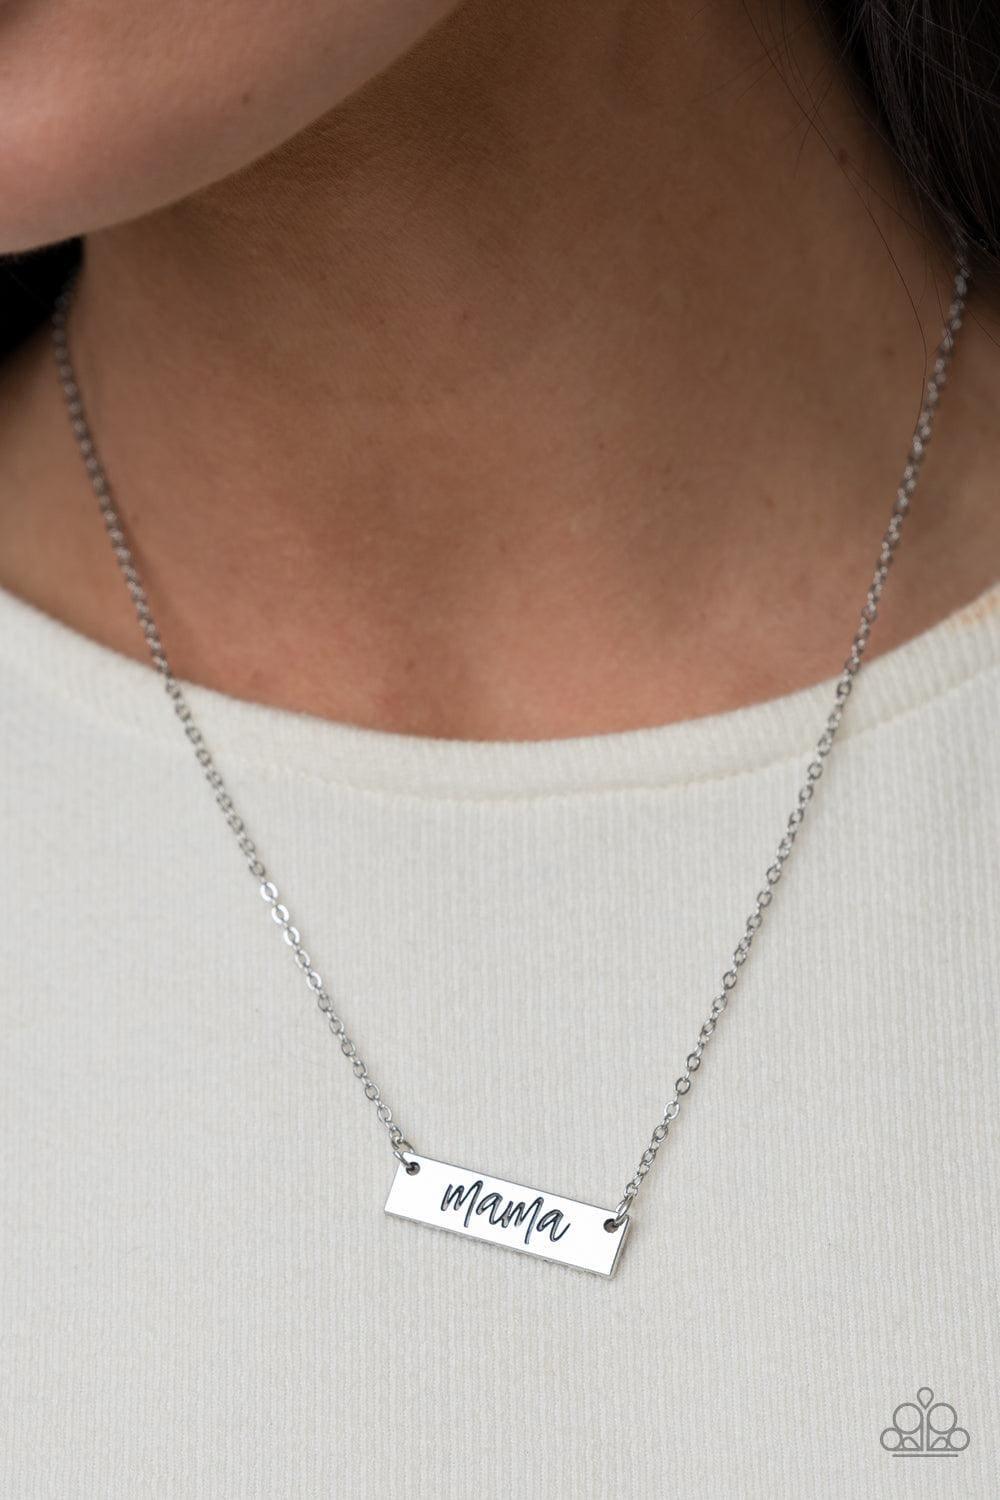 Paparazzi Accessories - Blessed Mama - Silver Necklace - Bling by JessieK